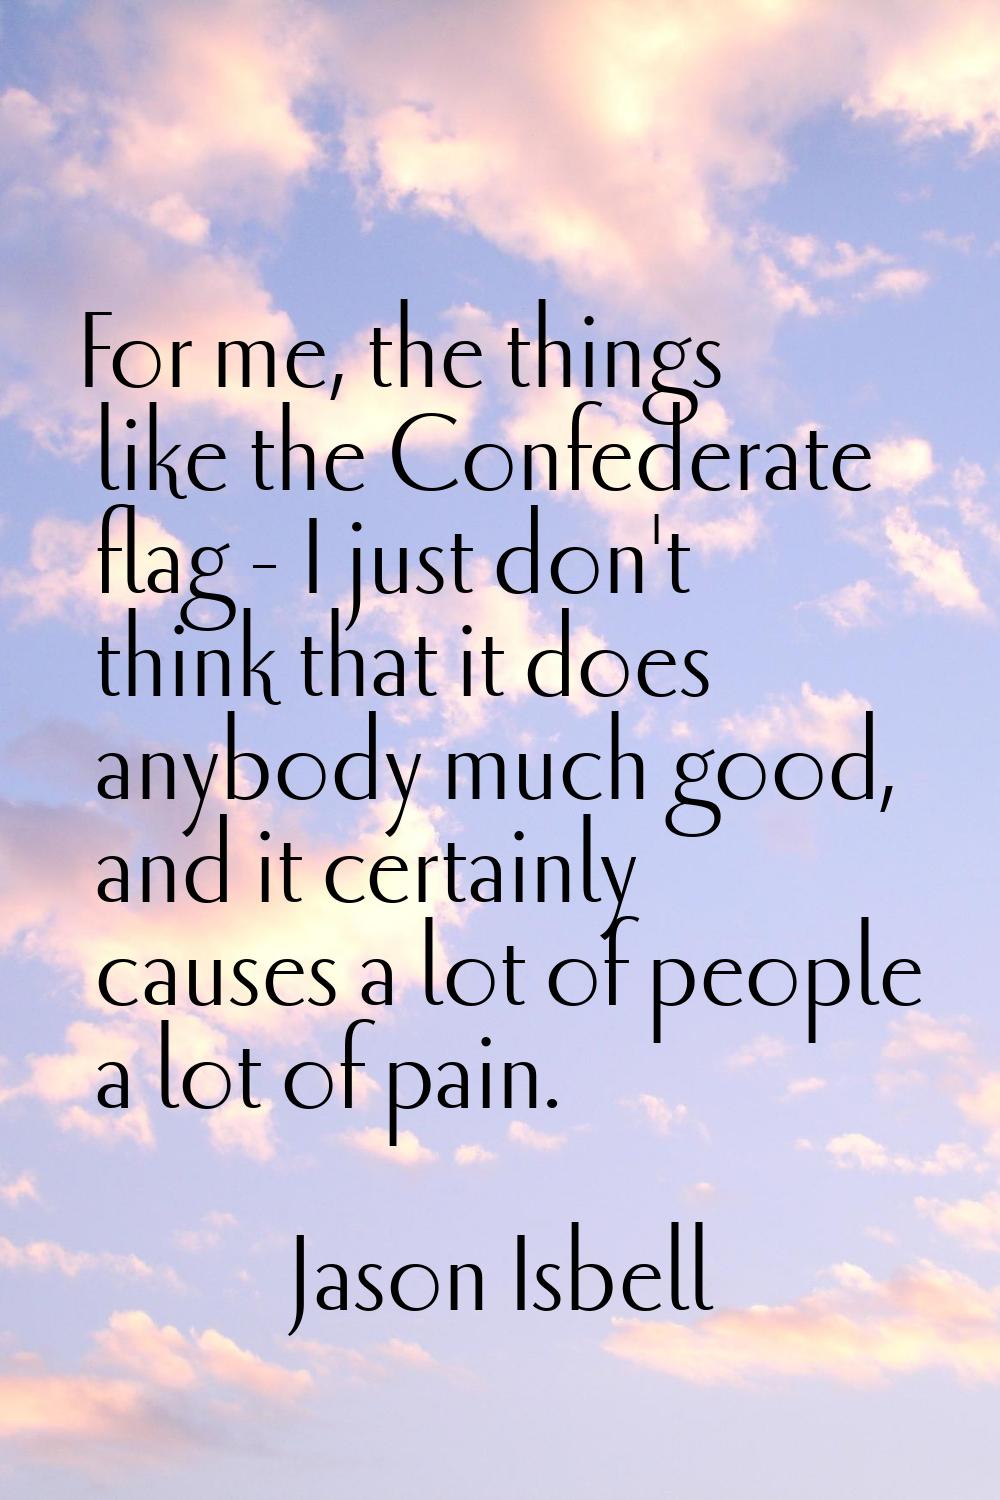 For me, the things like the Confederate flag - I just don't think that it does anybody much good, a